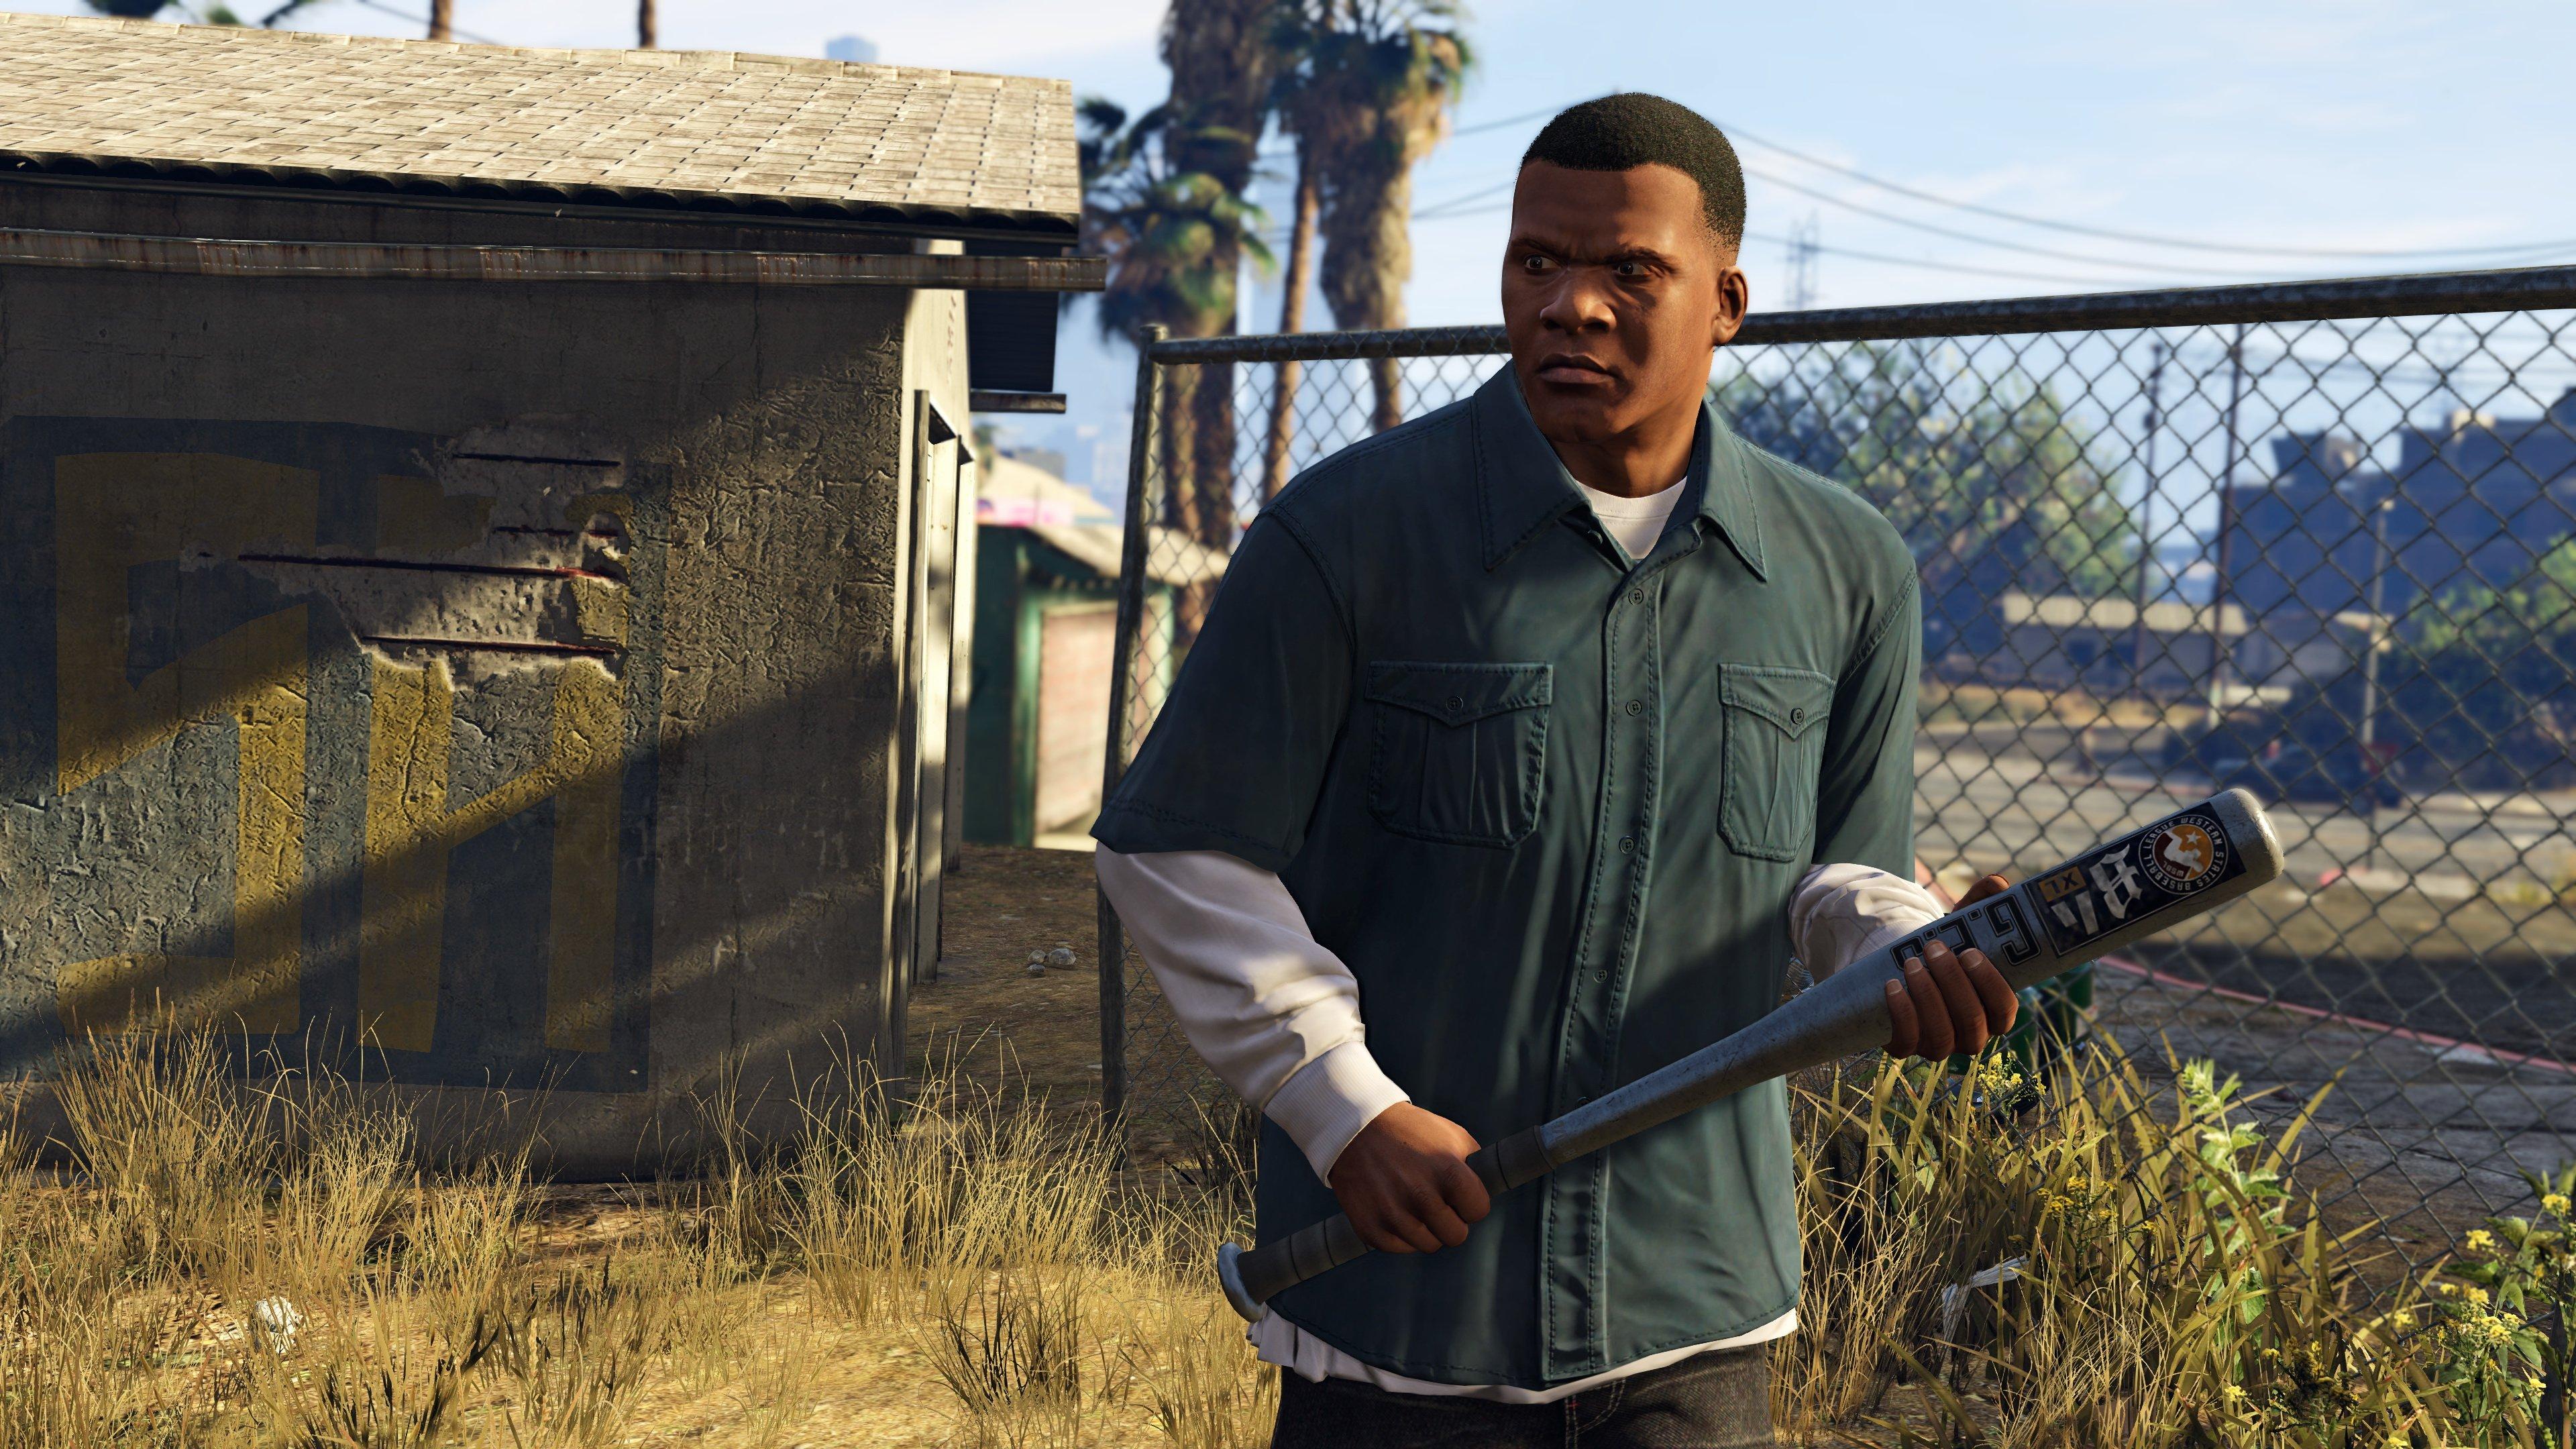 GTA 5: How to Play Heists Early in GTA Online, Earn Free Shark Cards